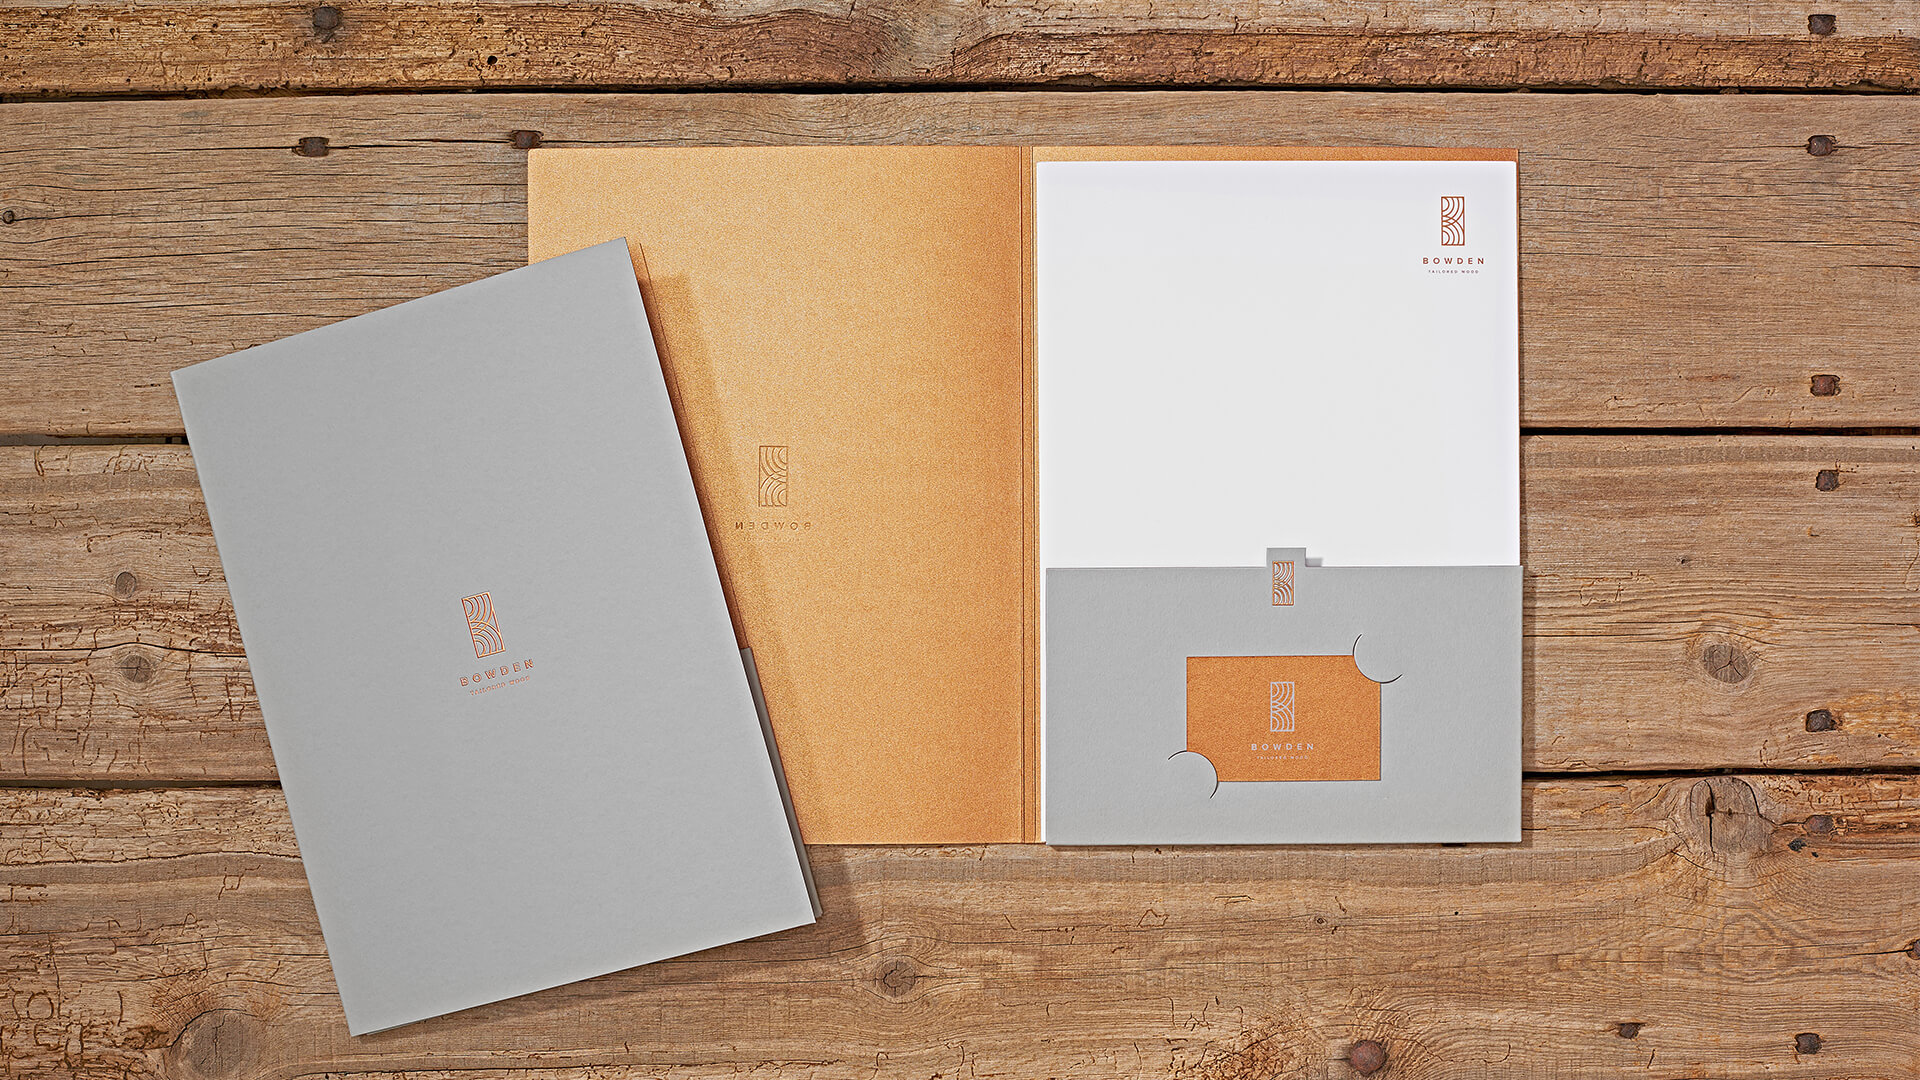 Bowden Joinery | We Are 778 Bournemouth Poole Branding Graphic Design Web Development Creative Agency